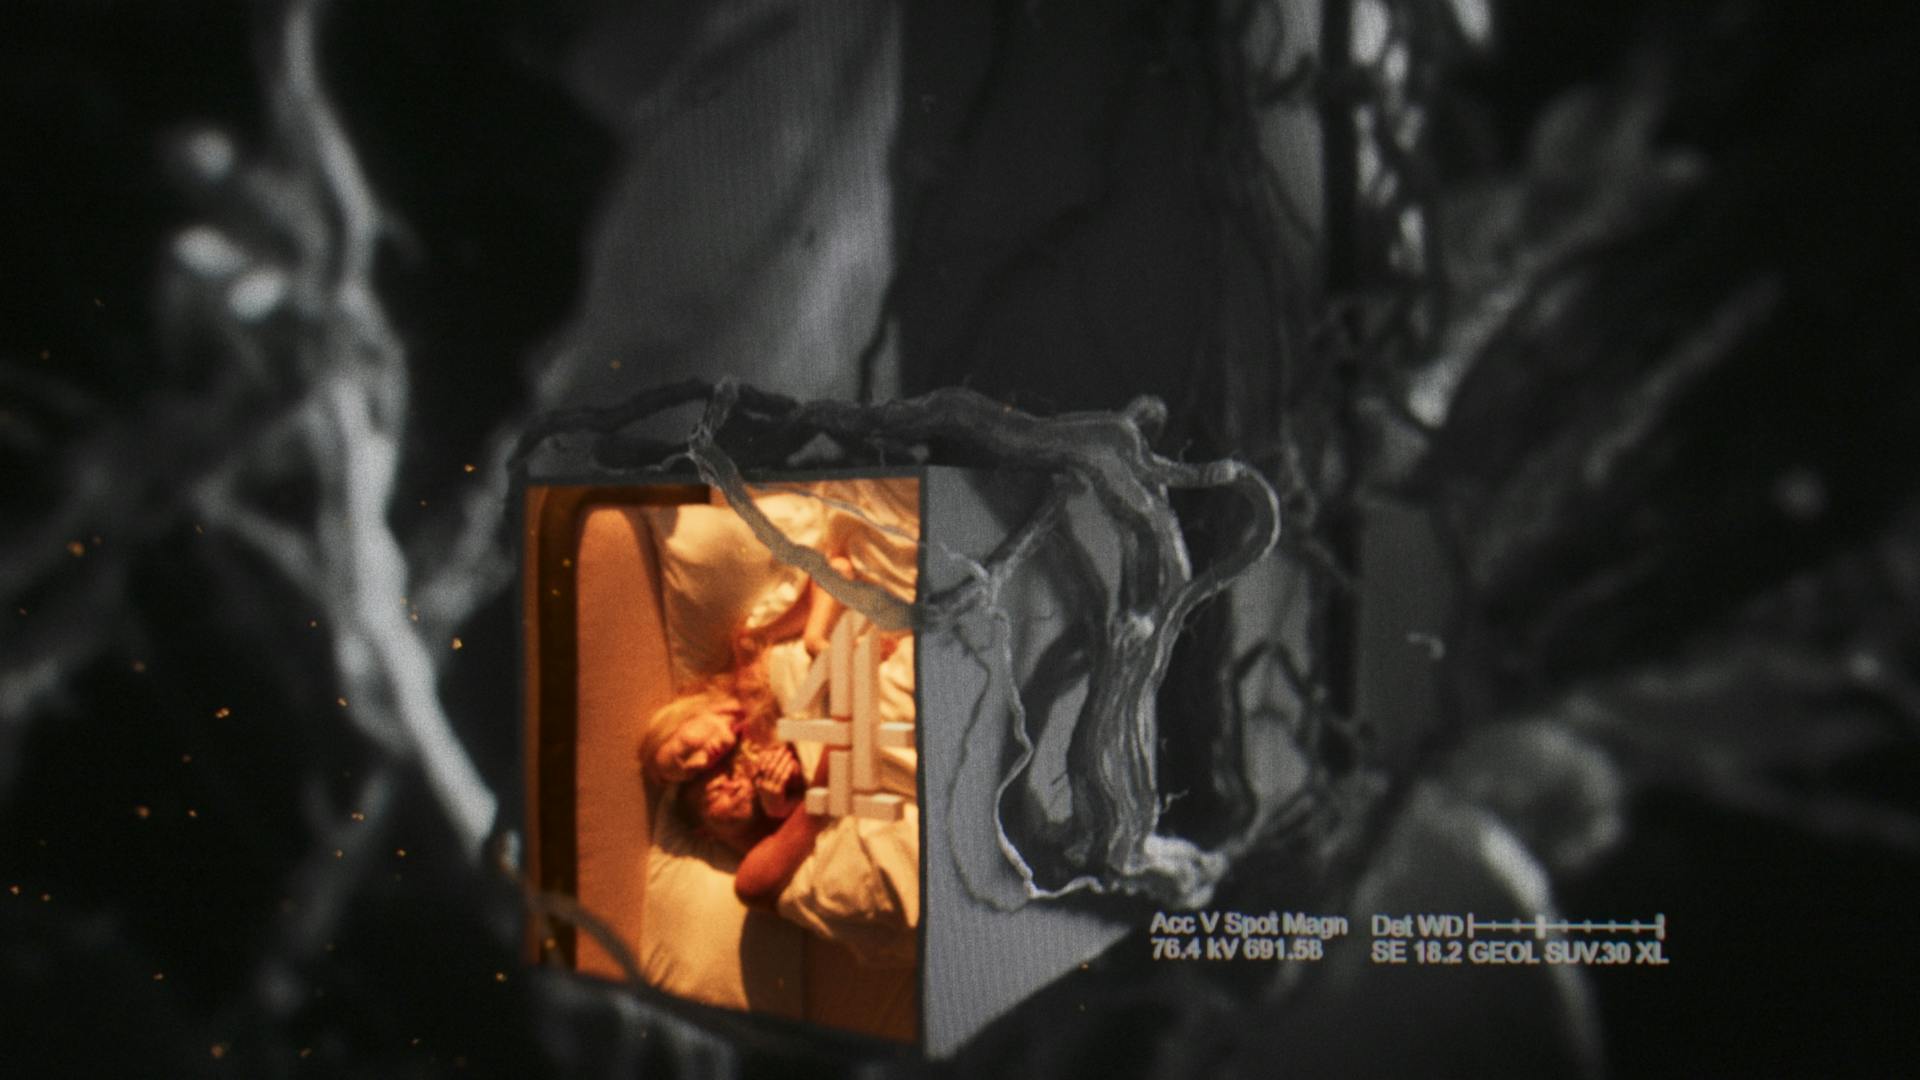 Still image from the new Channel 4 idents showing two people embracing on a bed, shown via a cube shaped portal encased in the Channel 4 logo